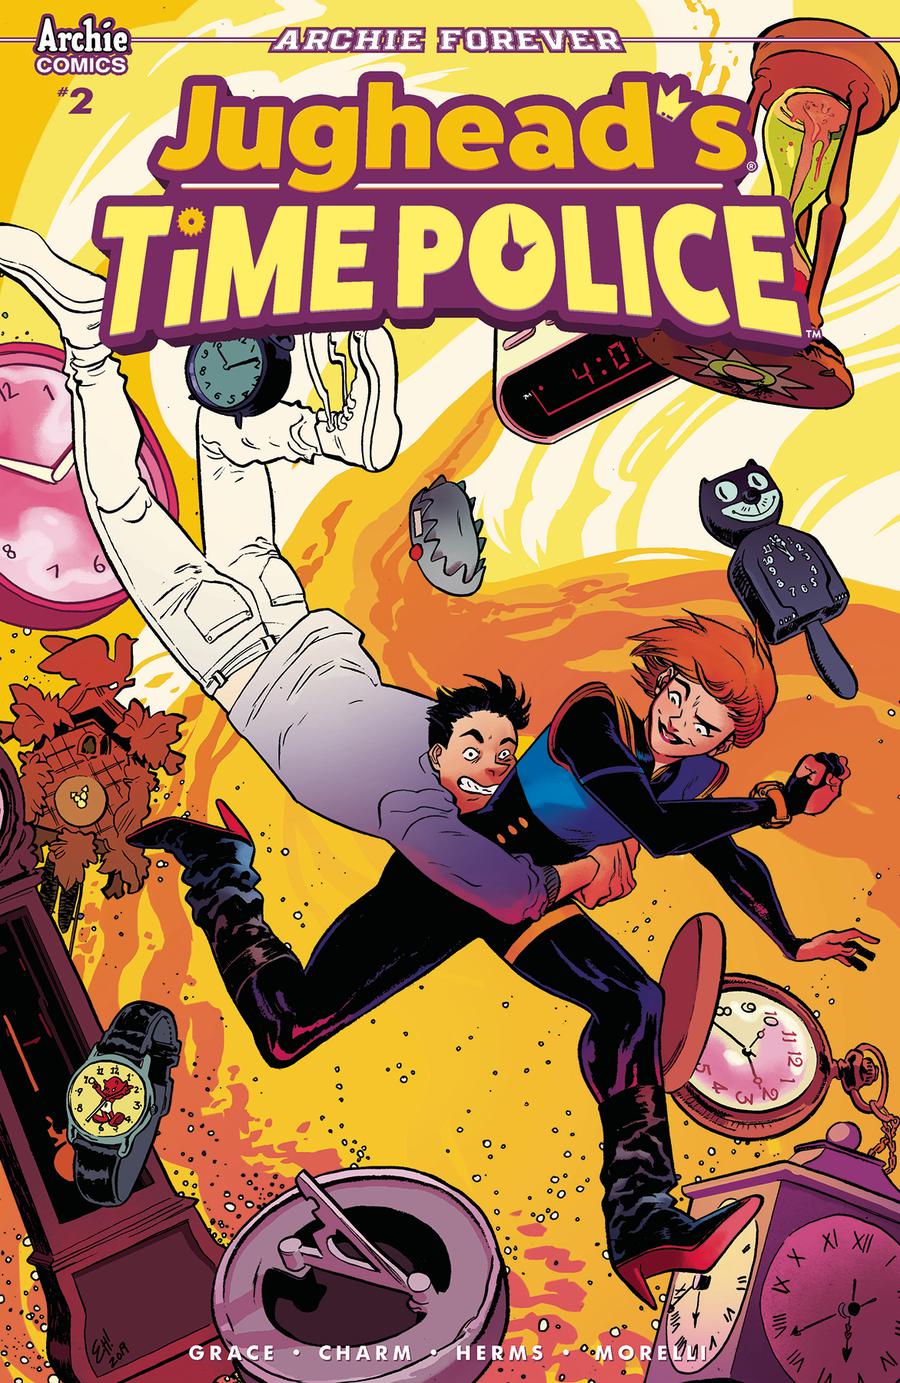 Jugheads Time Police Vol 2 #2 Cover B Variant Erica Henderson Cover